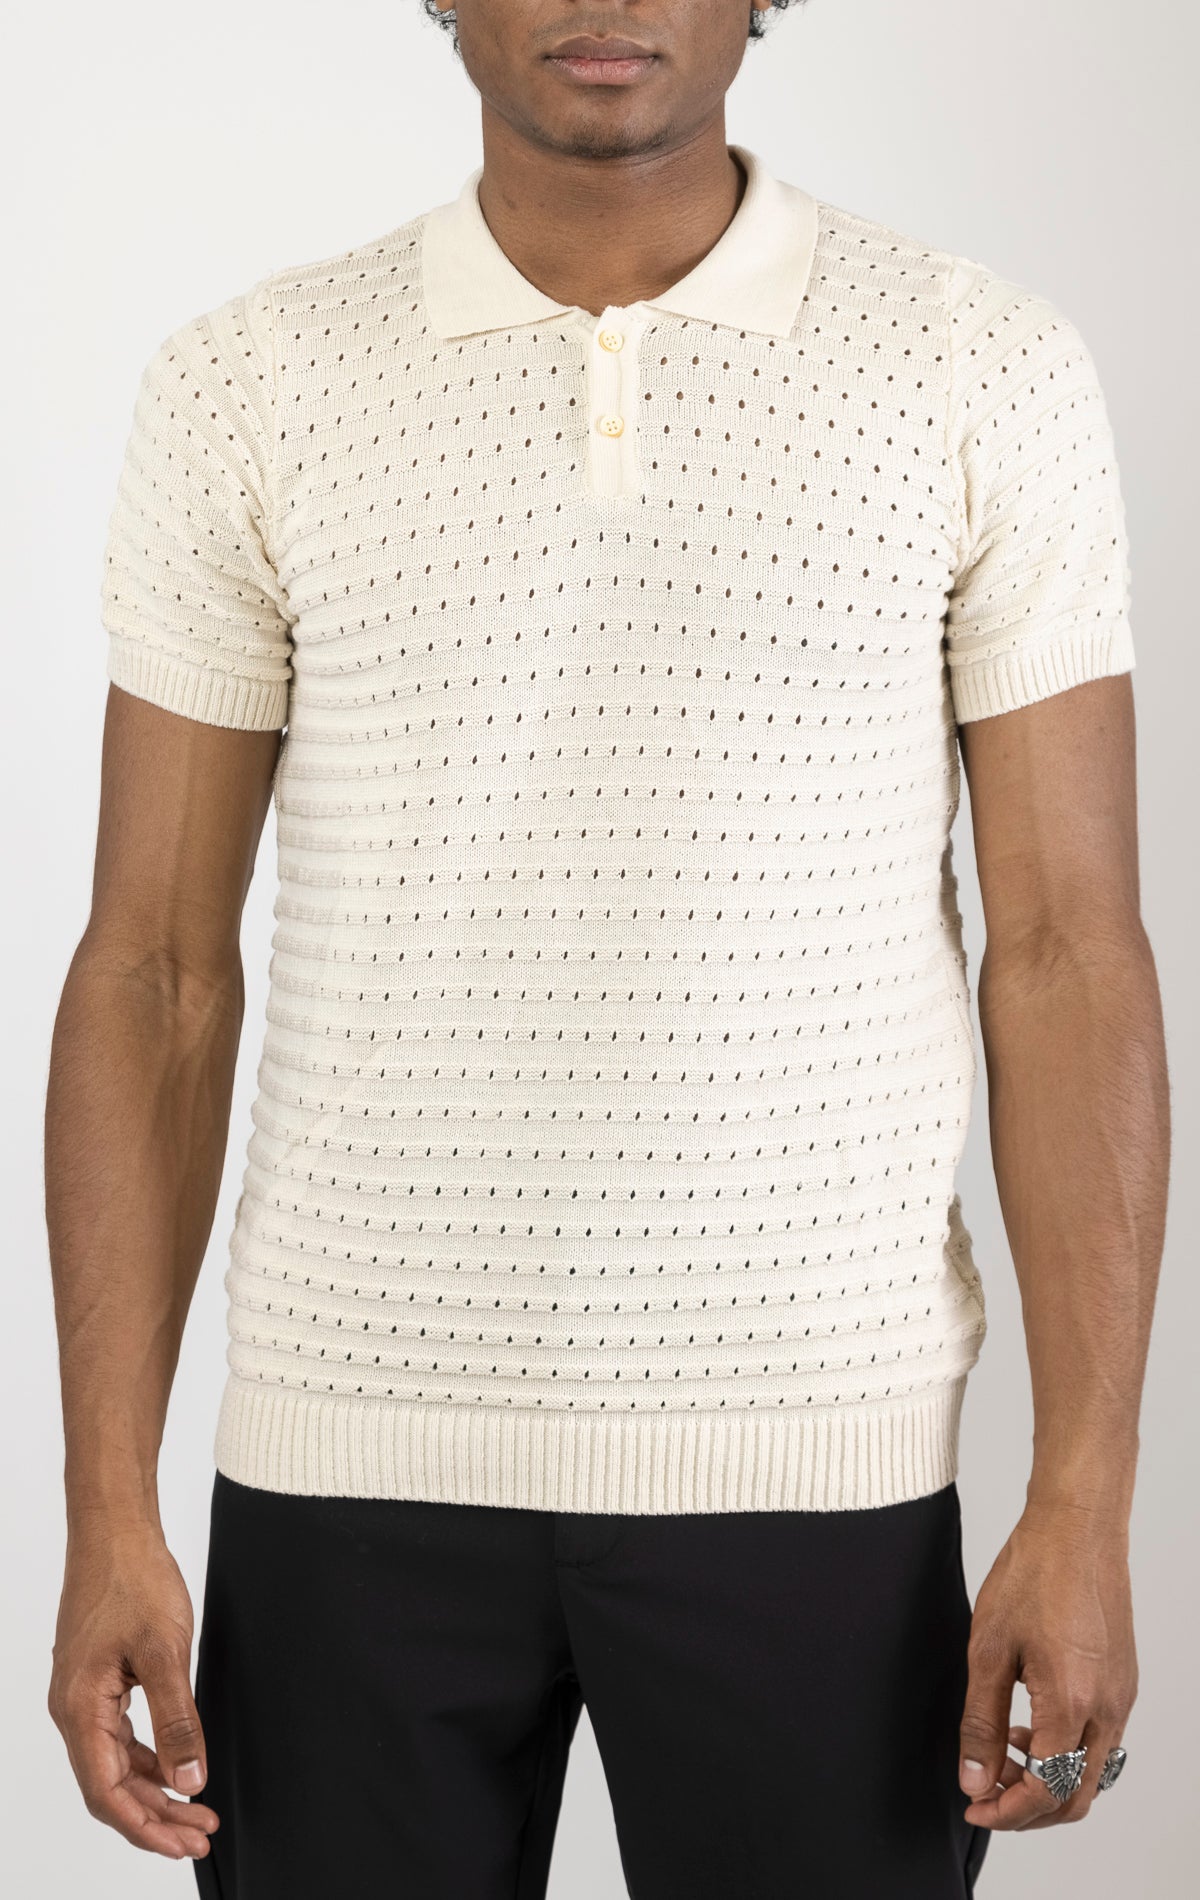 Men's eyelet short sleeve polo tee in Beige. The shirt is made from a soft and breathable fabric (50% viscose, 50% polyamide) and features a classic polo collar, short sleeves, and delicate eyelet detailing along the sleeves.